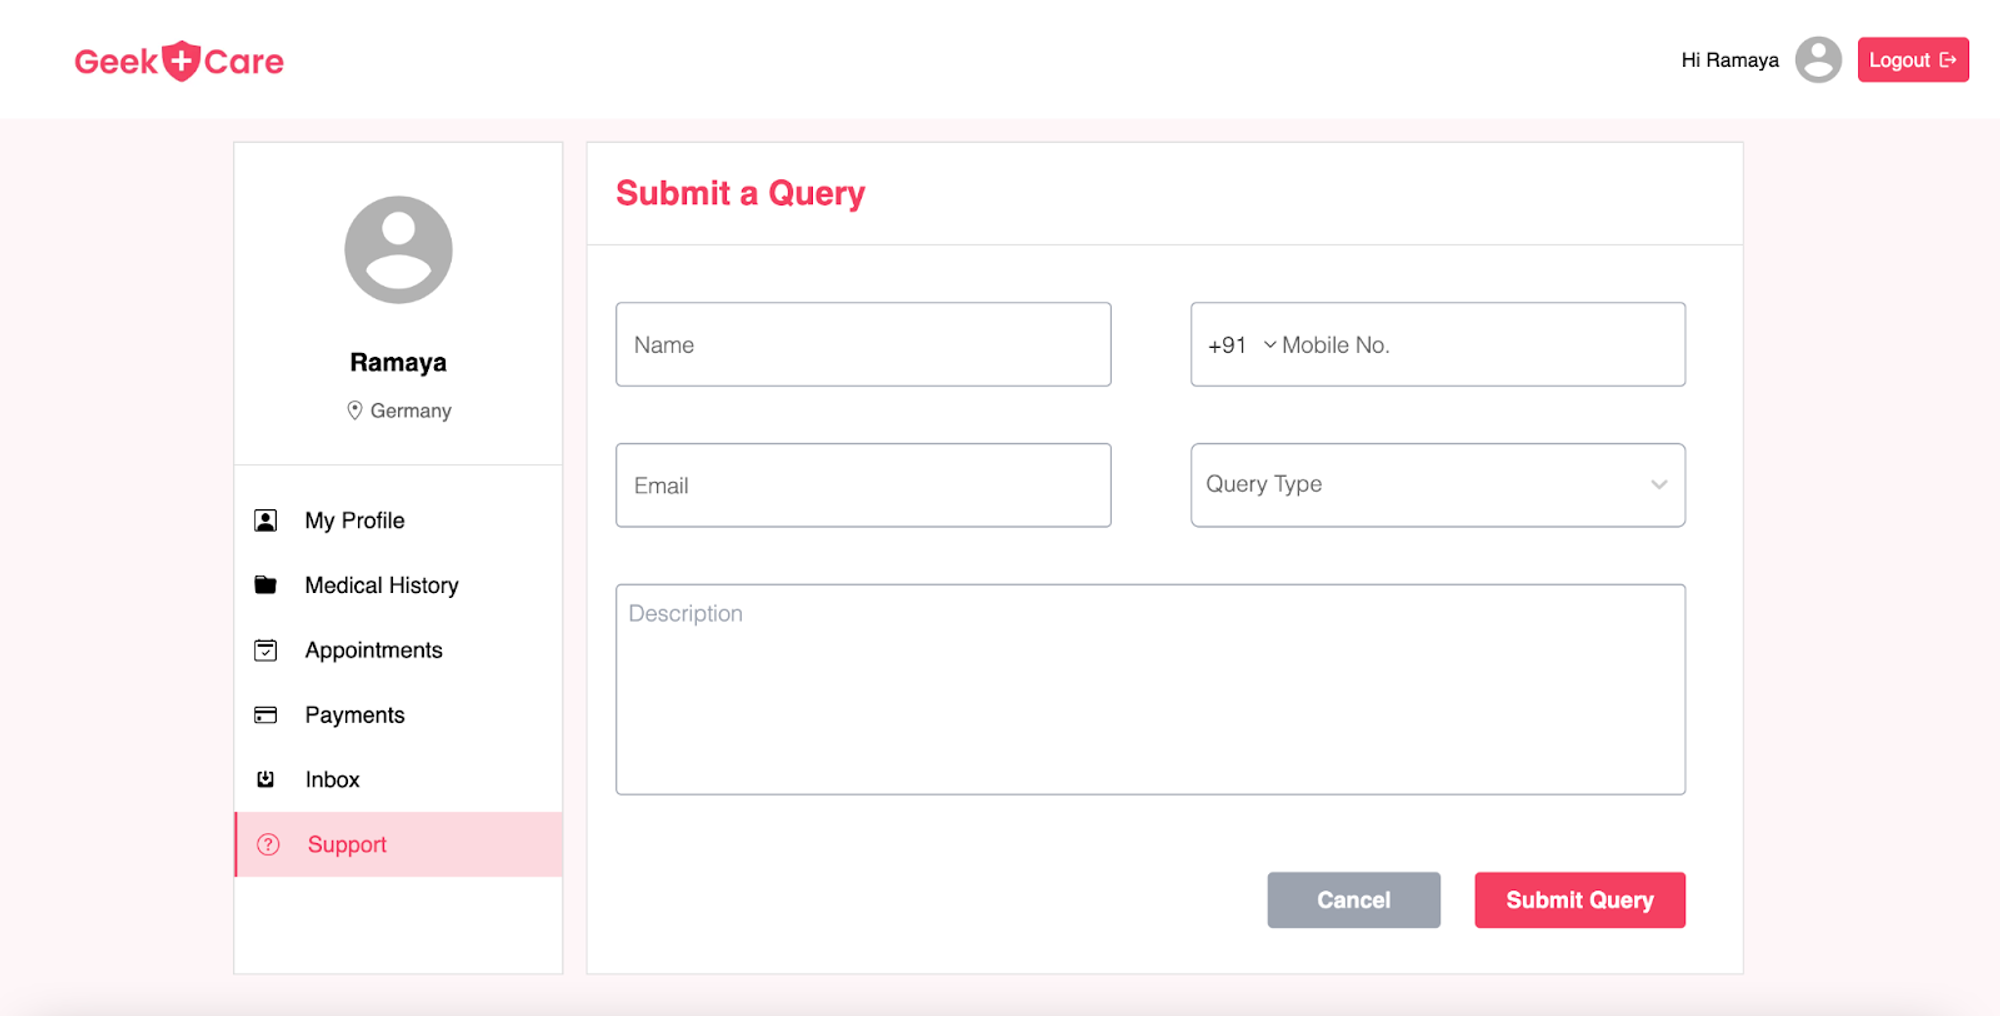 Submit a Query Screen